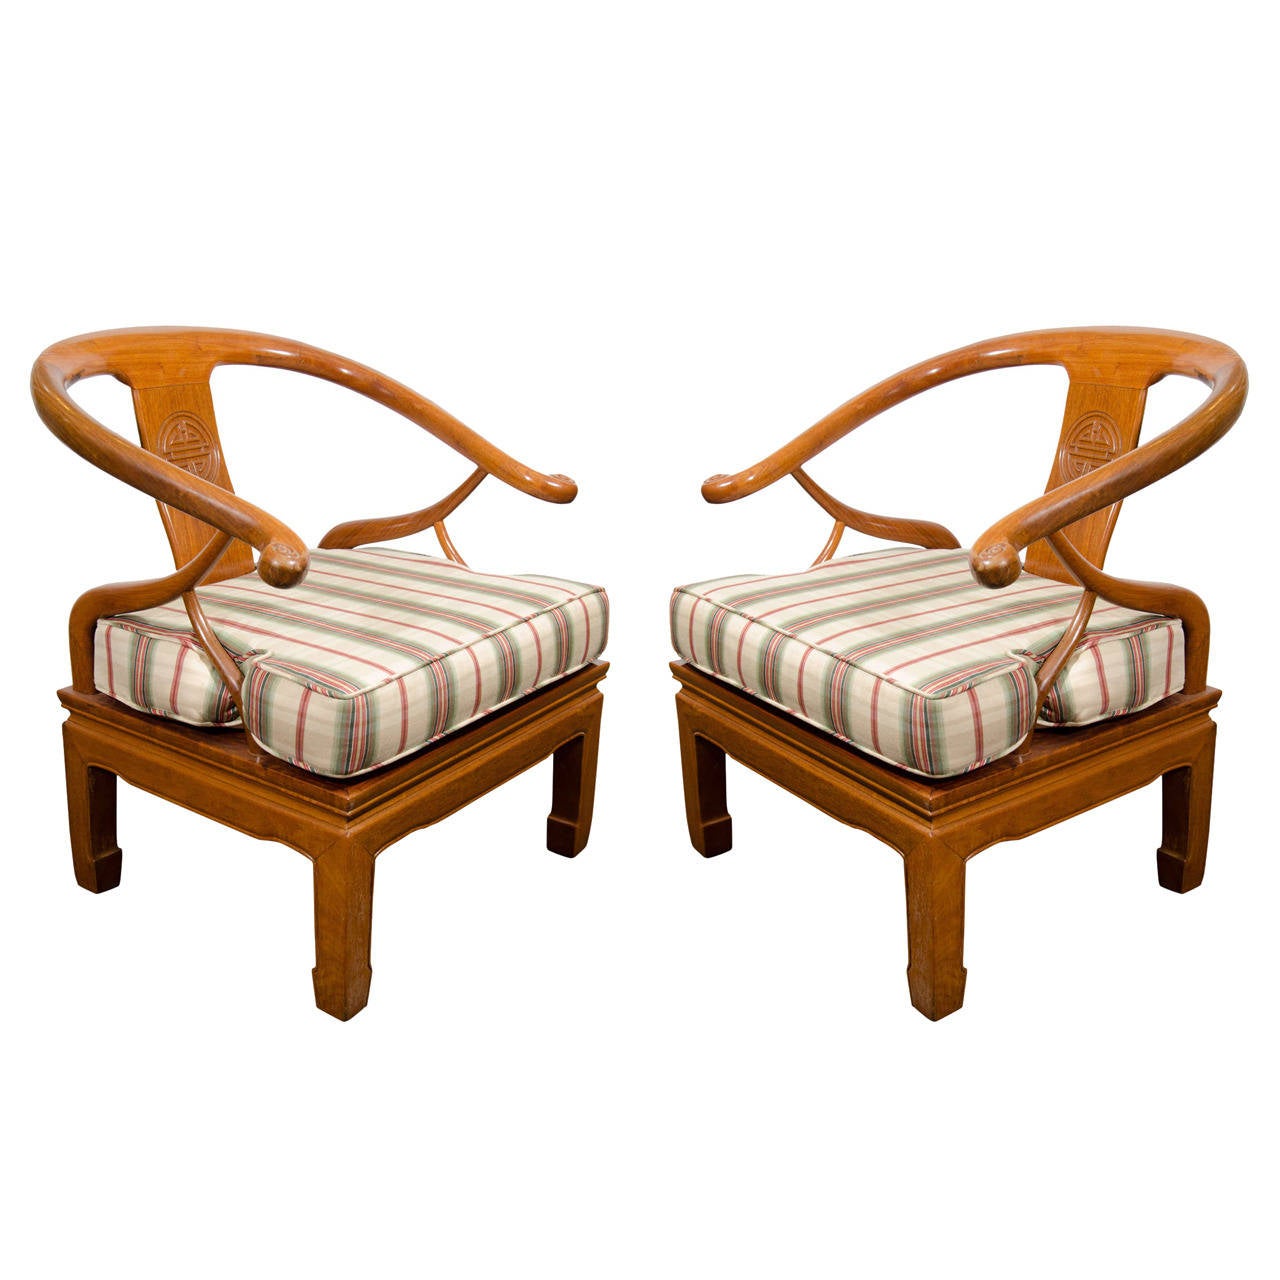 Pair of Chinese Solid Rosewood Carved Horseshoe-Shaped Armchairs